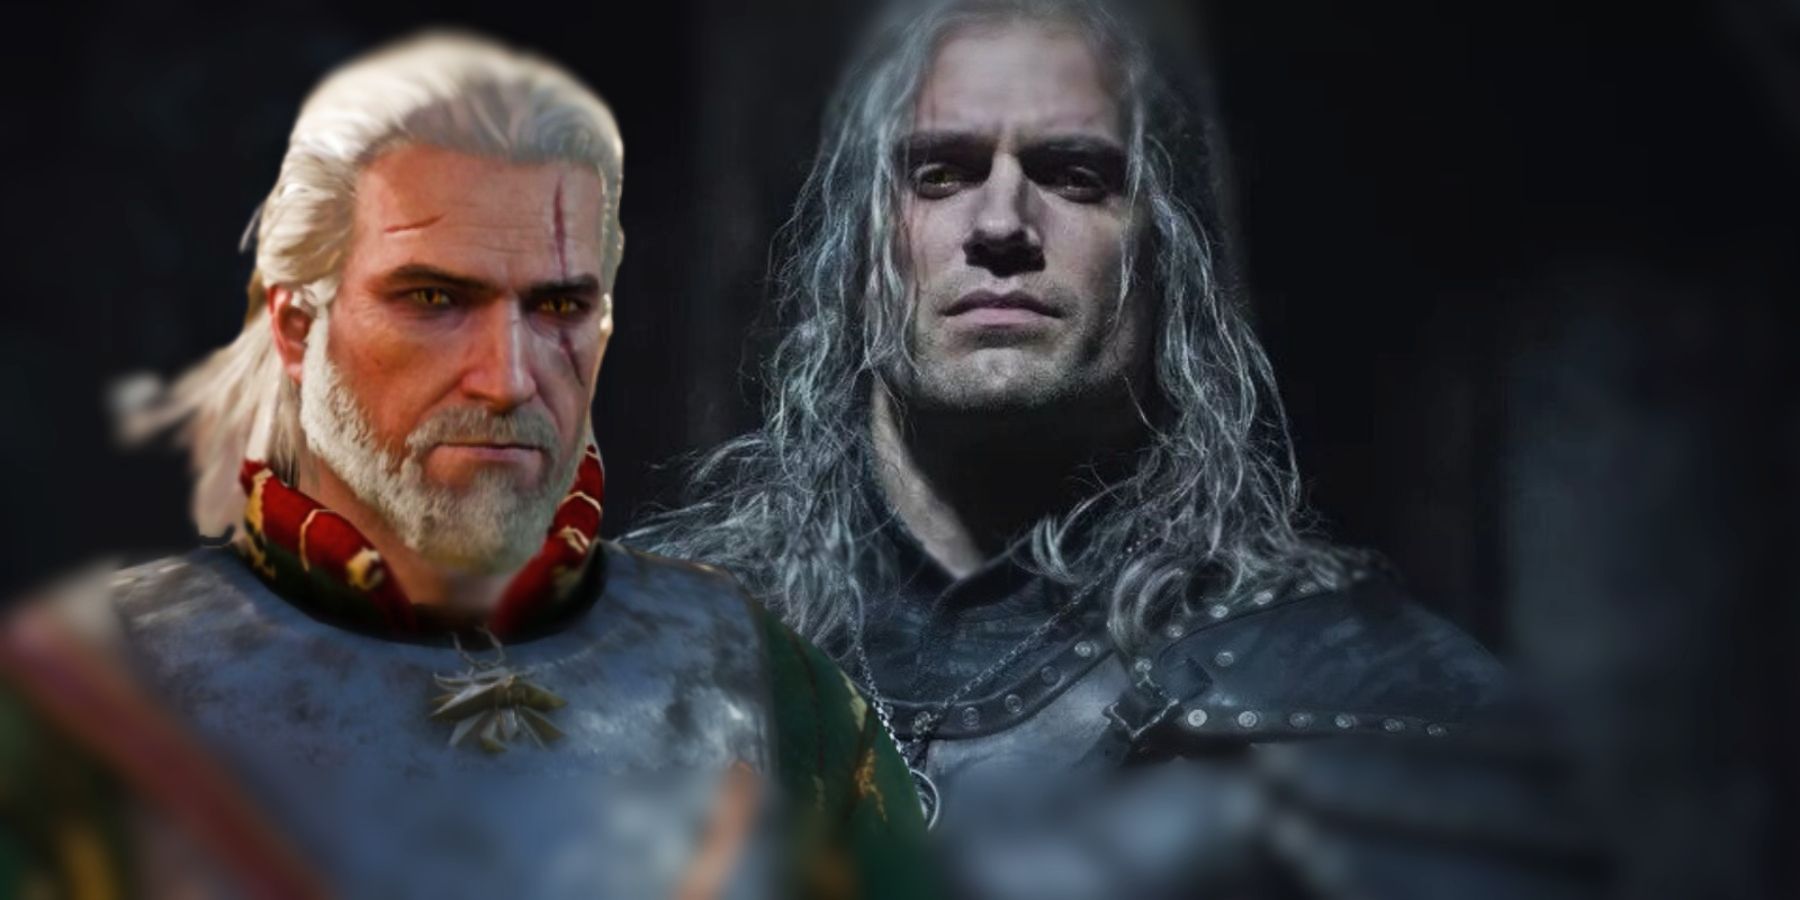 the witcher netlifx henry cavill geralt of rivia books games liam hemsworth replace